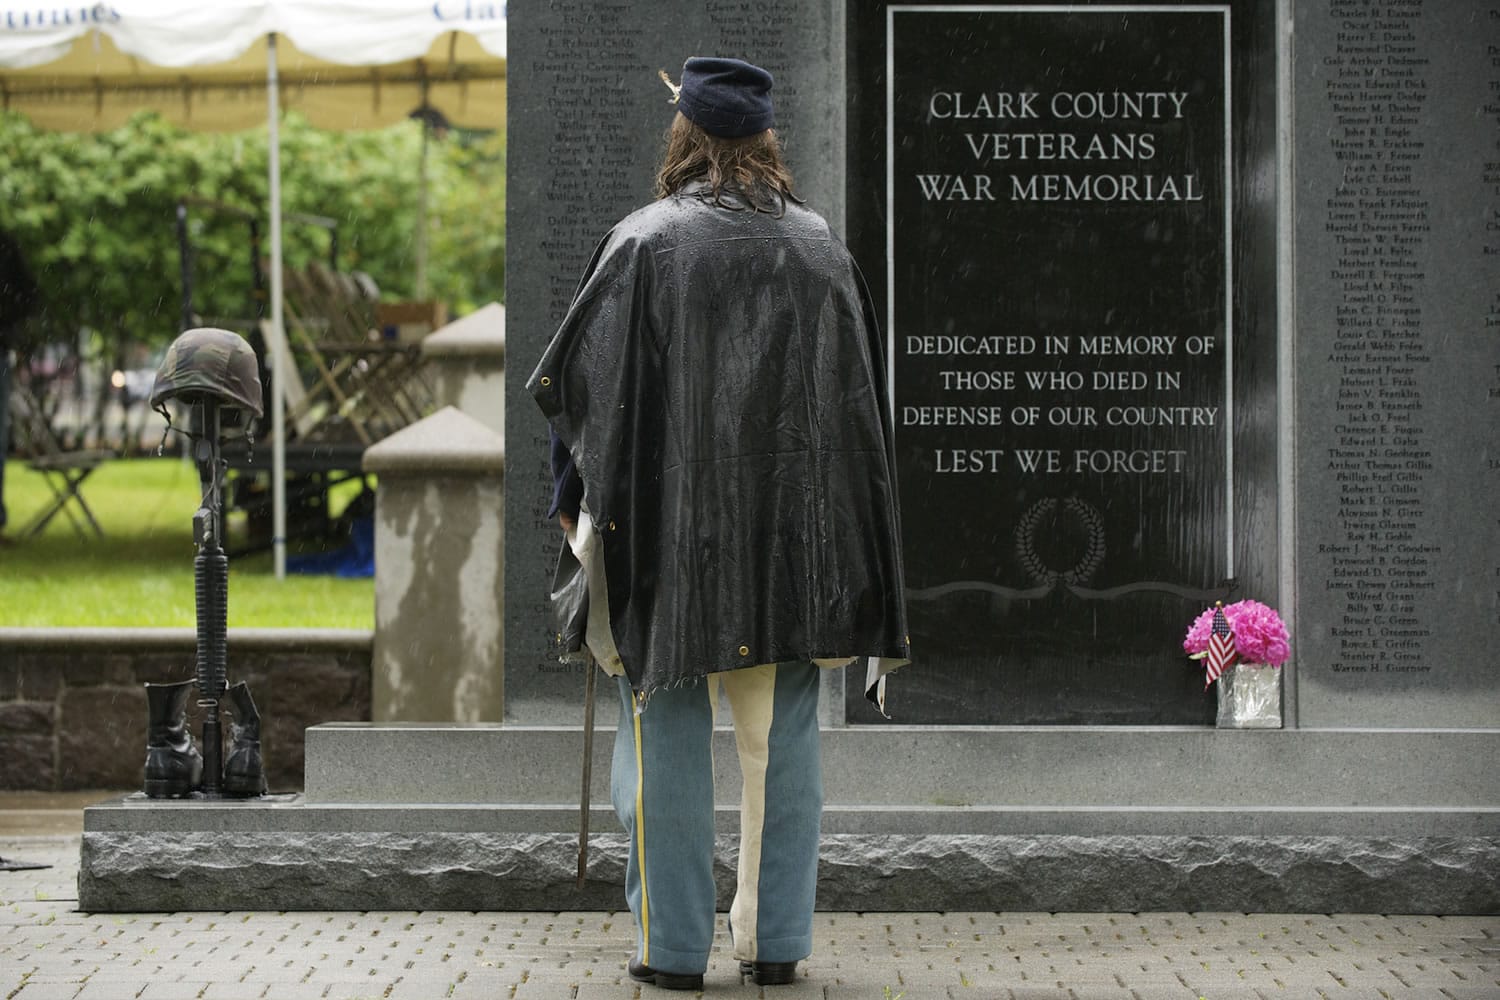 Civil War re-enactor Emily Wattez reads names from the Clark County Veterans War Memorial before Vancouver's Memorial Day Observance at the Vancouver Barracks in 2013.